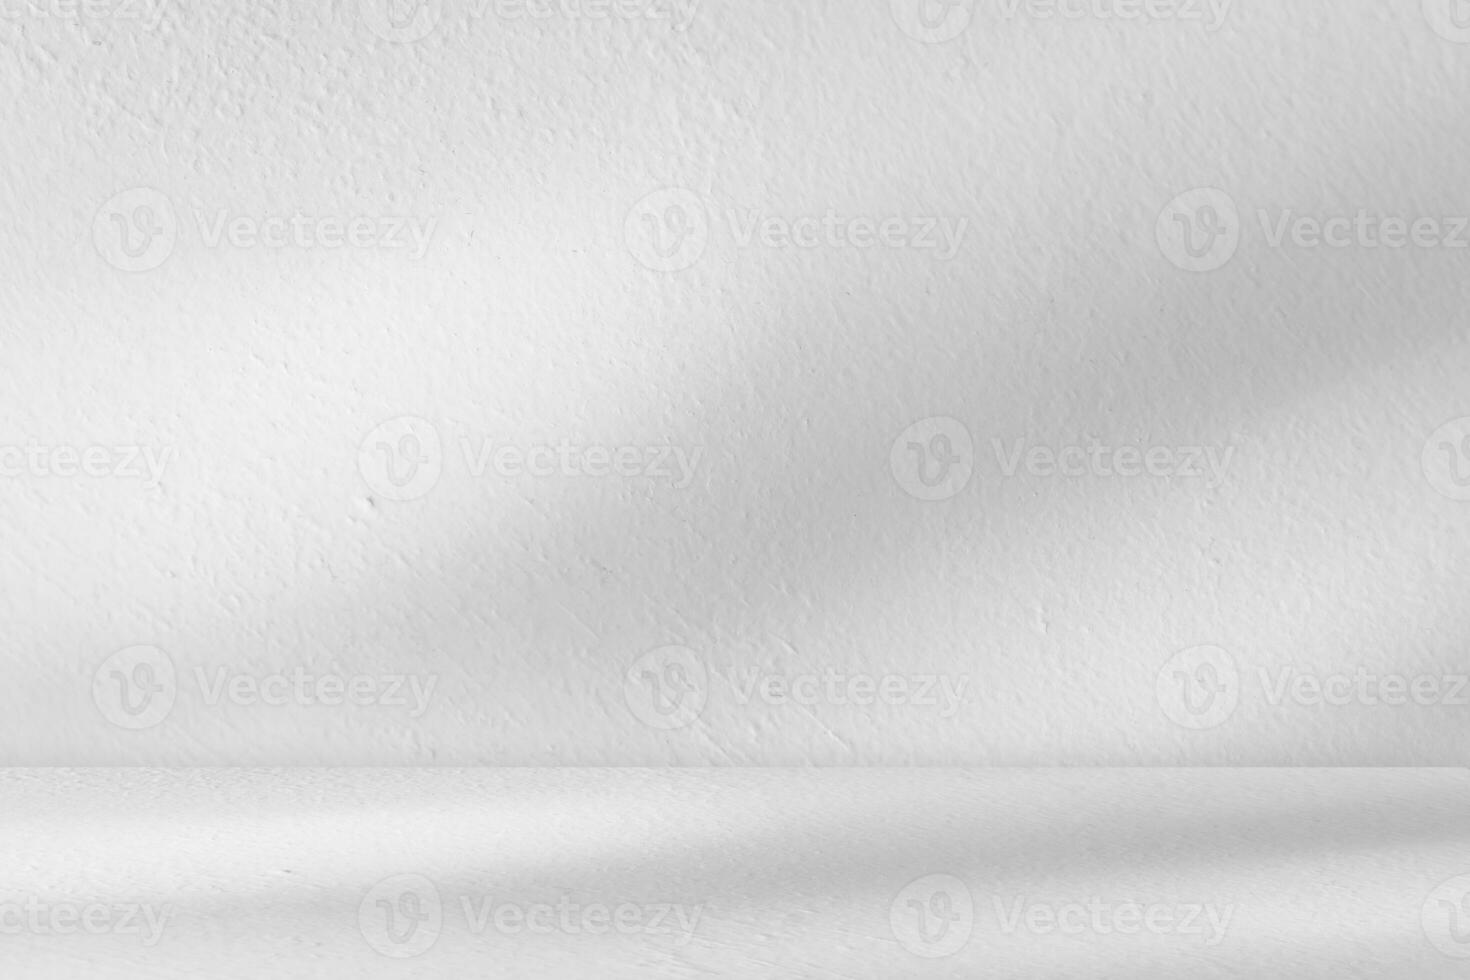 Background White Wall Studio,Empty Cement Room Background of Kitchen with Light,Shadow on Desk Podium  Surface Texture,Backdrop Product Present, Grey Concrete Display with Sunlight effect on Top Shelf photo